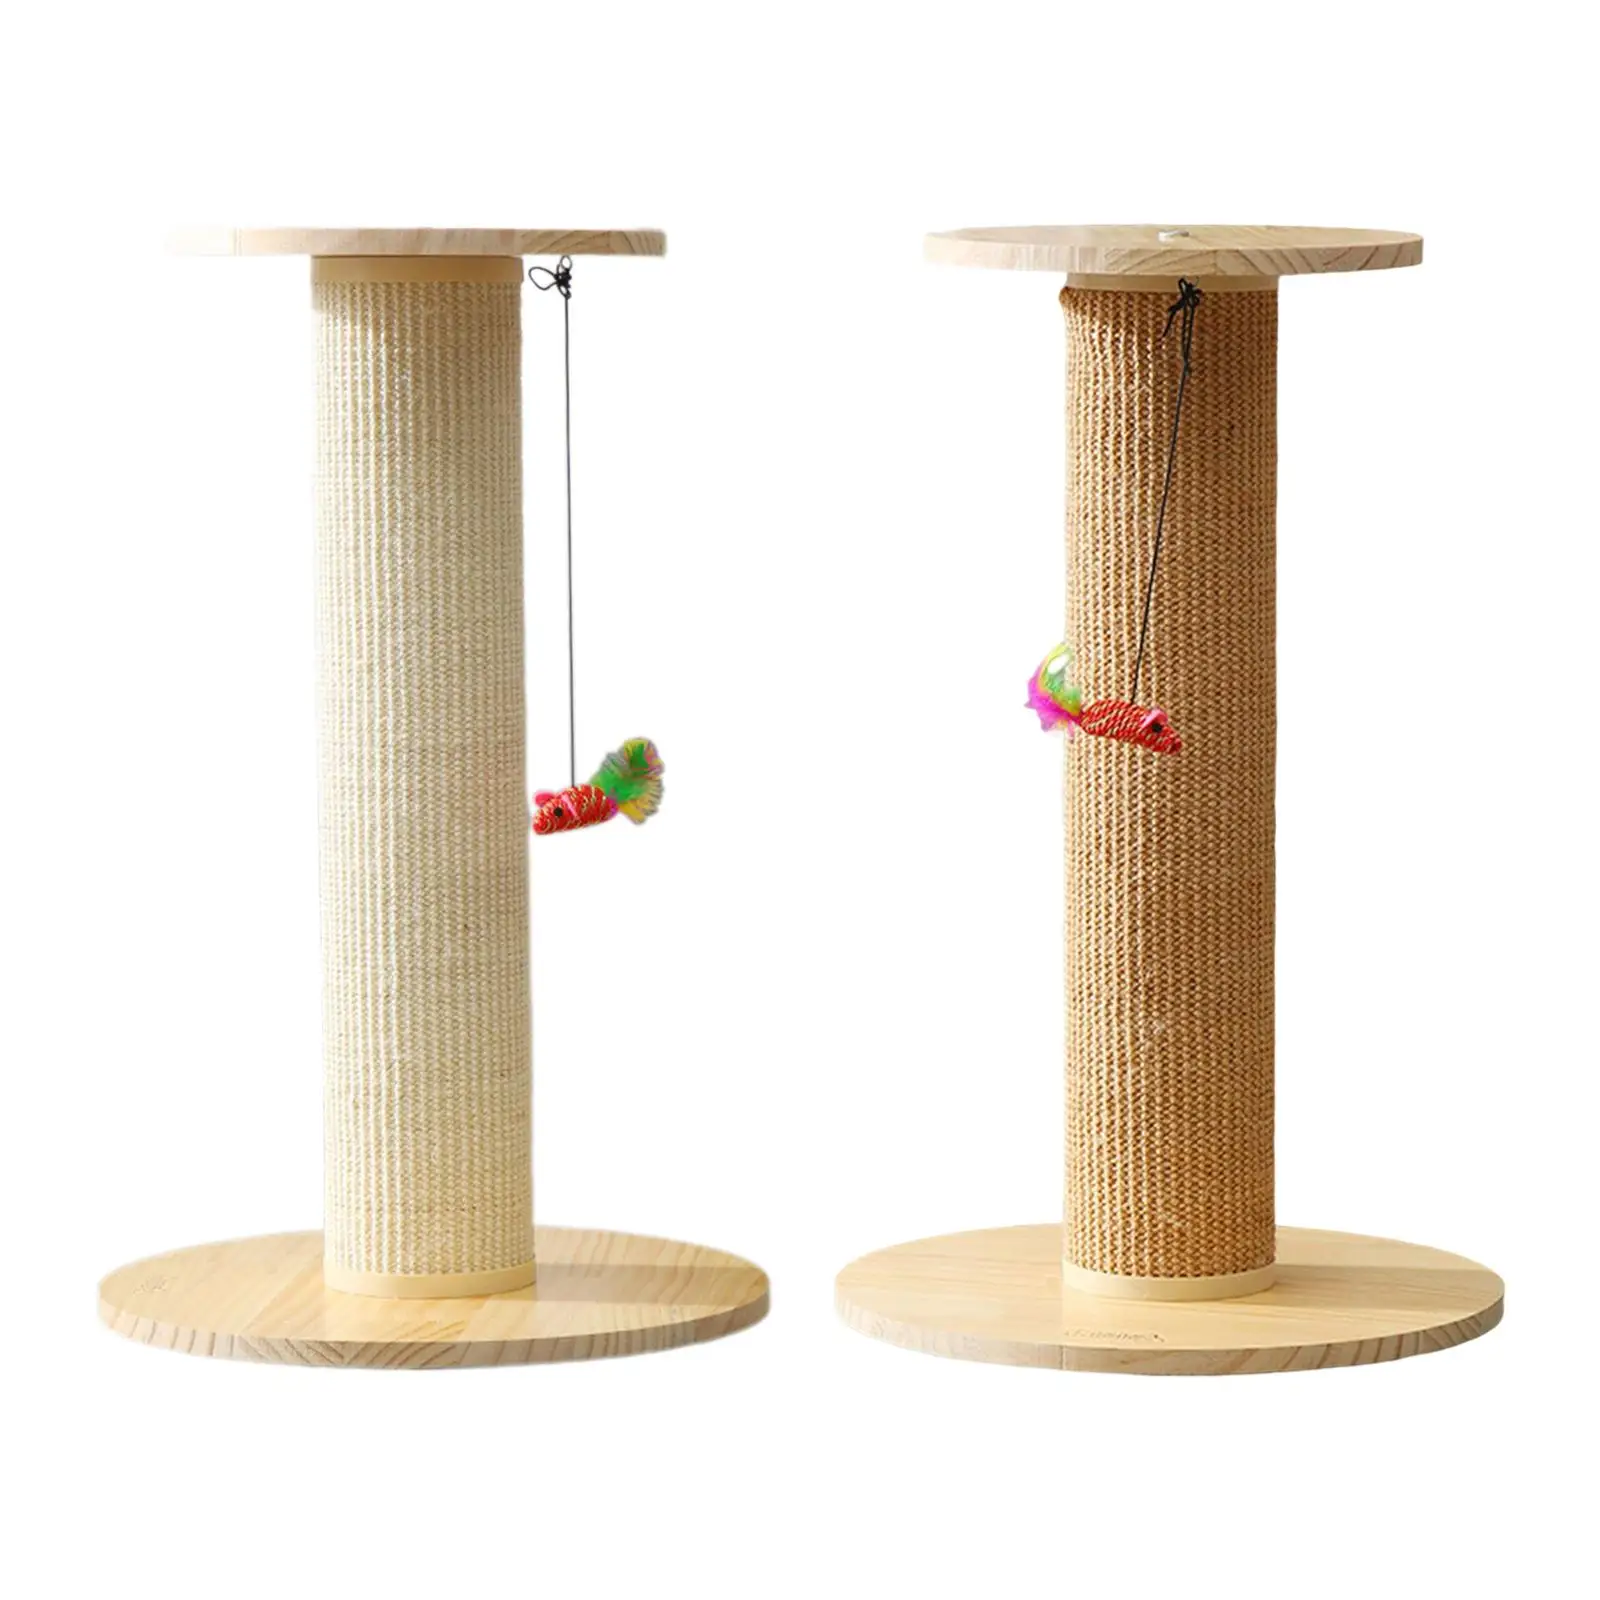 Cat scratch post Your Furniture Exercise Cats Durable for Kittens